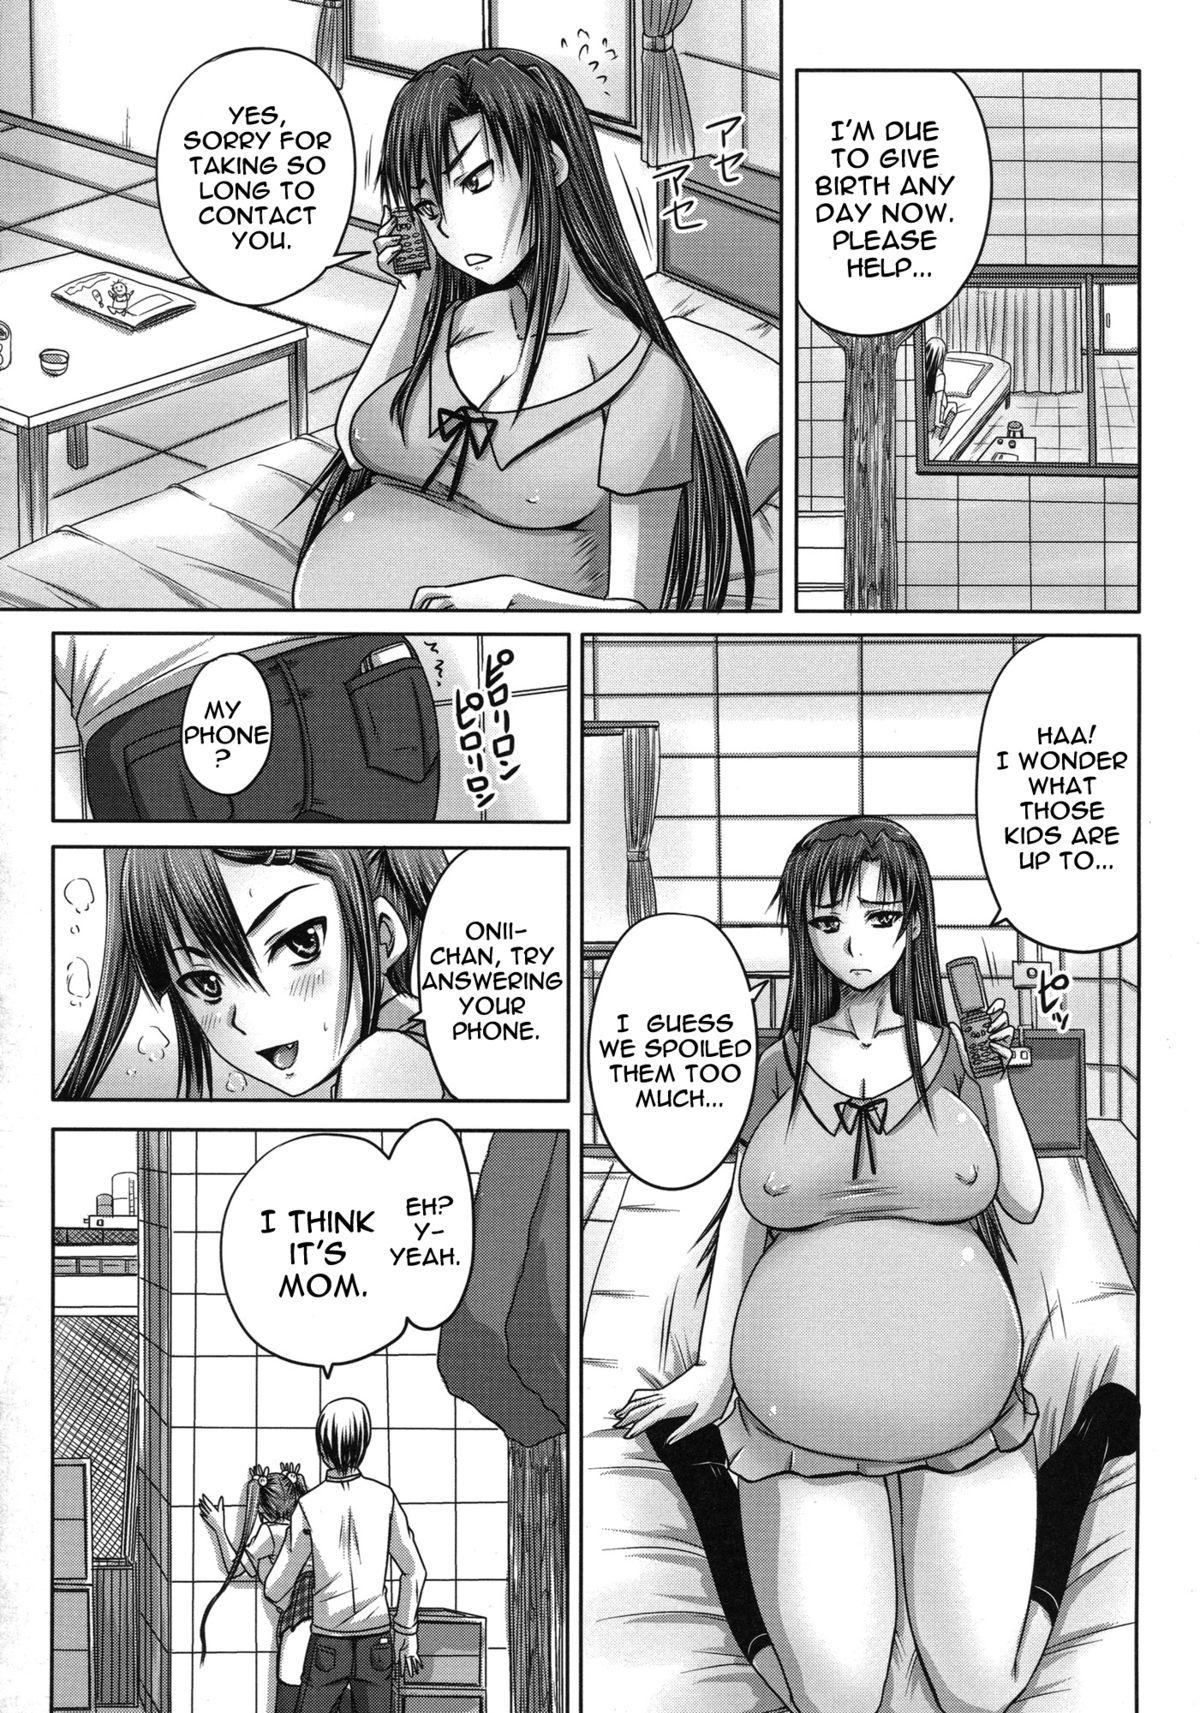 [Akigami Satoru] Tsukurou! Onaho Ane - Let's made a Sex Sleeve from Sister | Turning My Elder-Sister into a Sex-Sleeve [English] {doujin-moe.us} 112